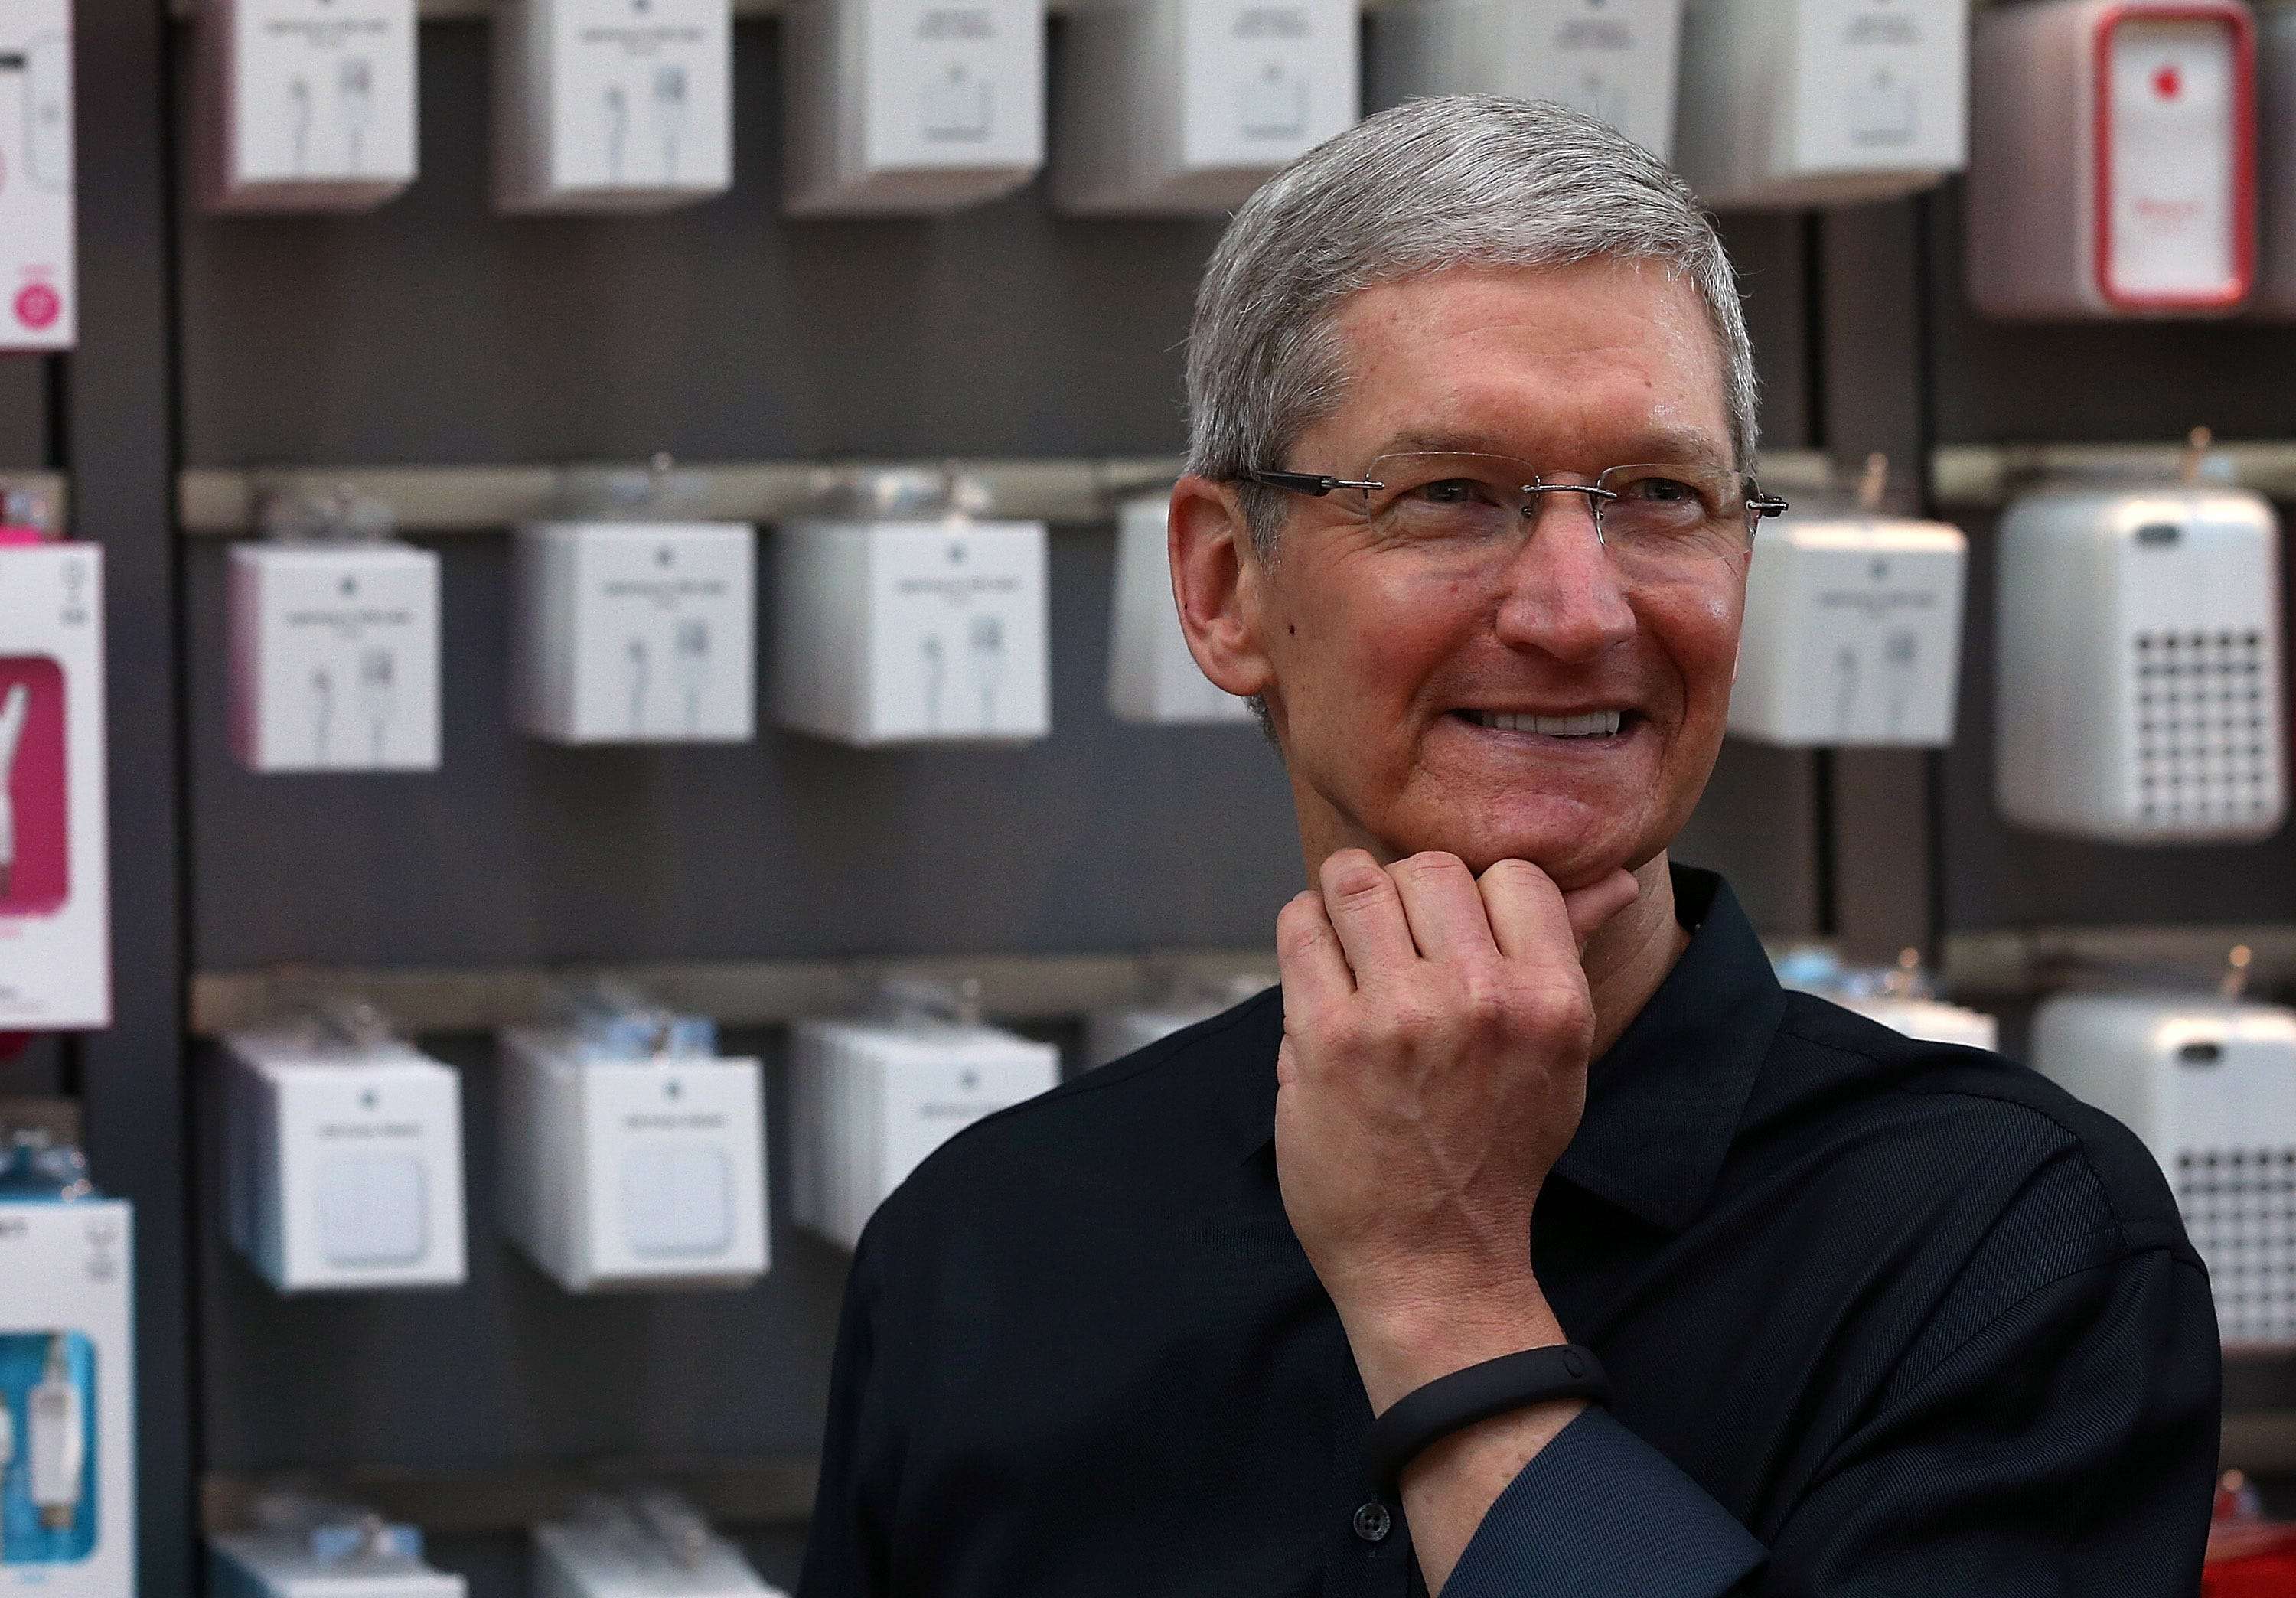 Apple is giving CEO Tim Cook over 38 million in stock to stay with the